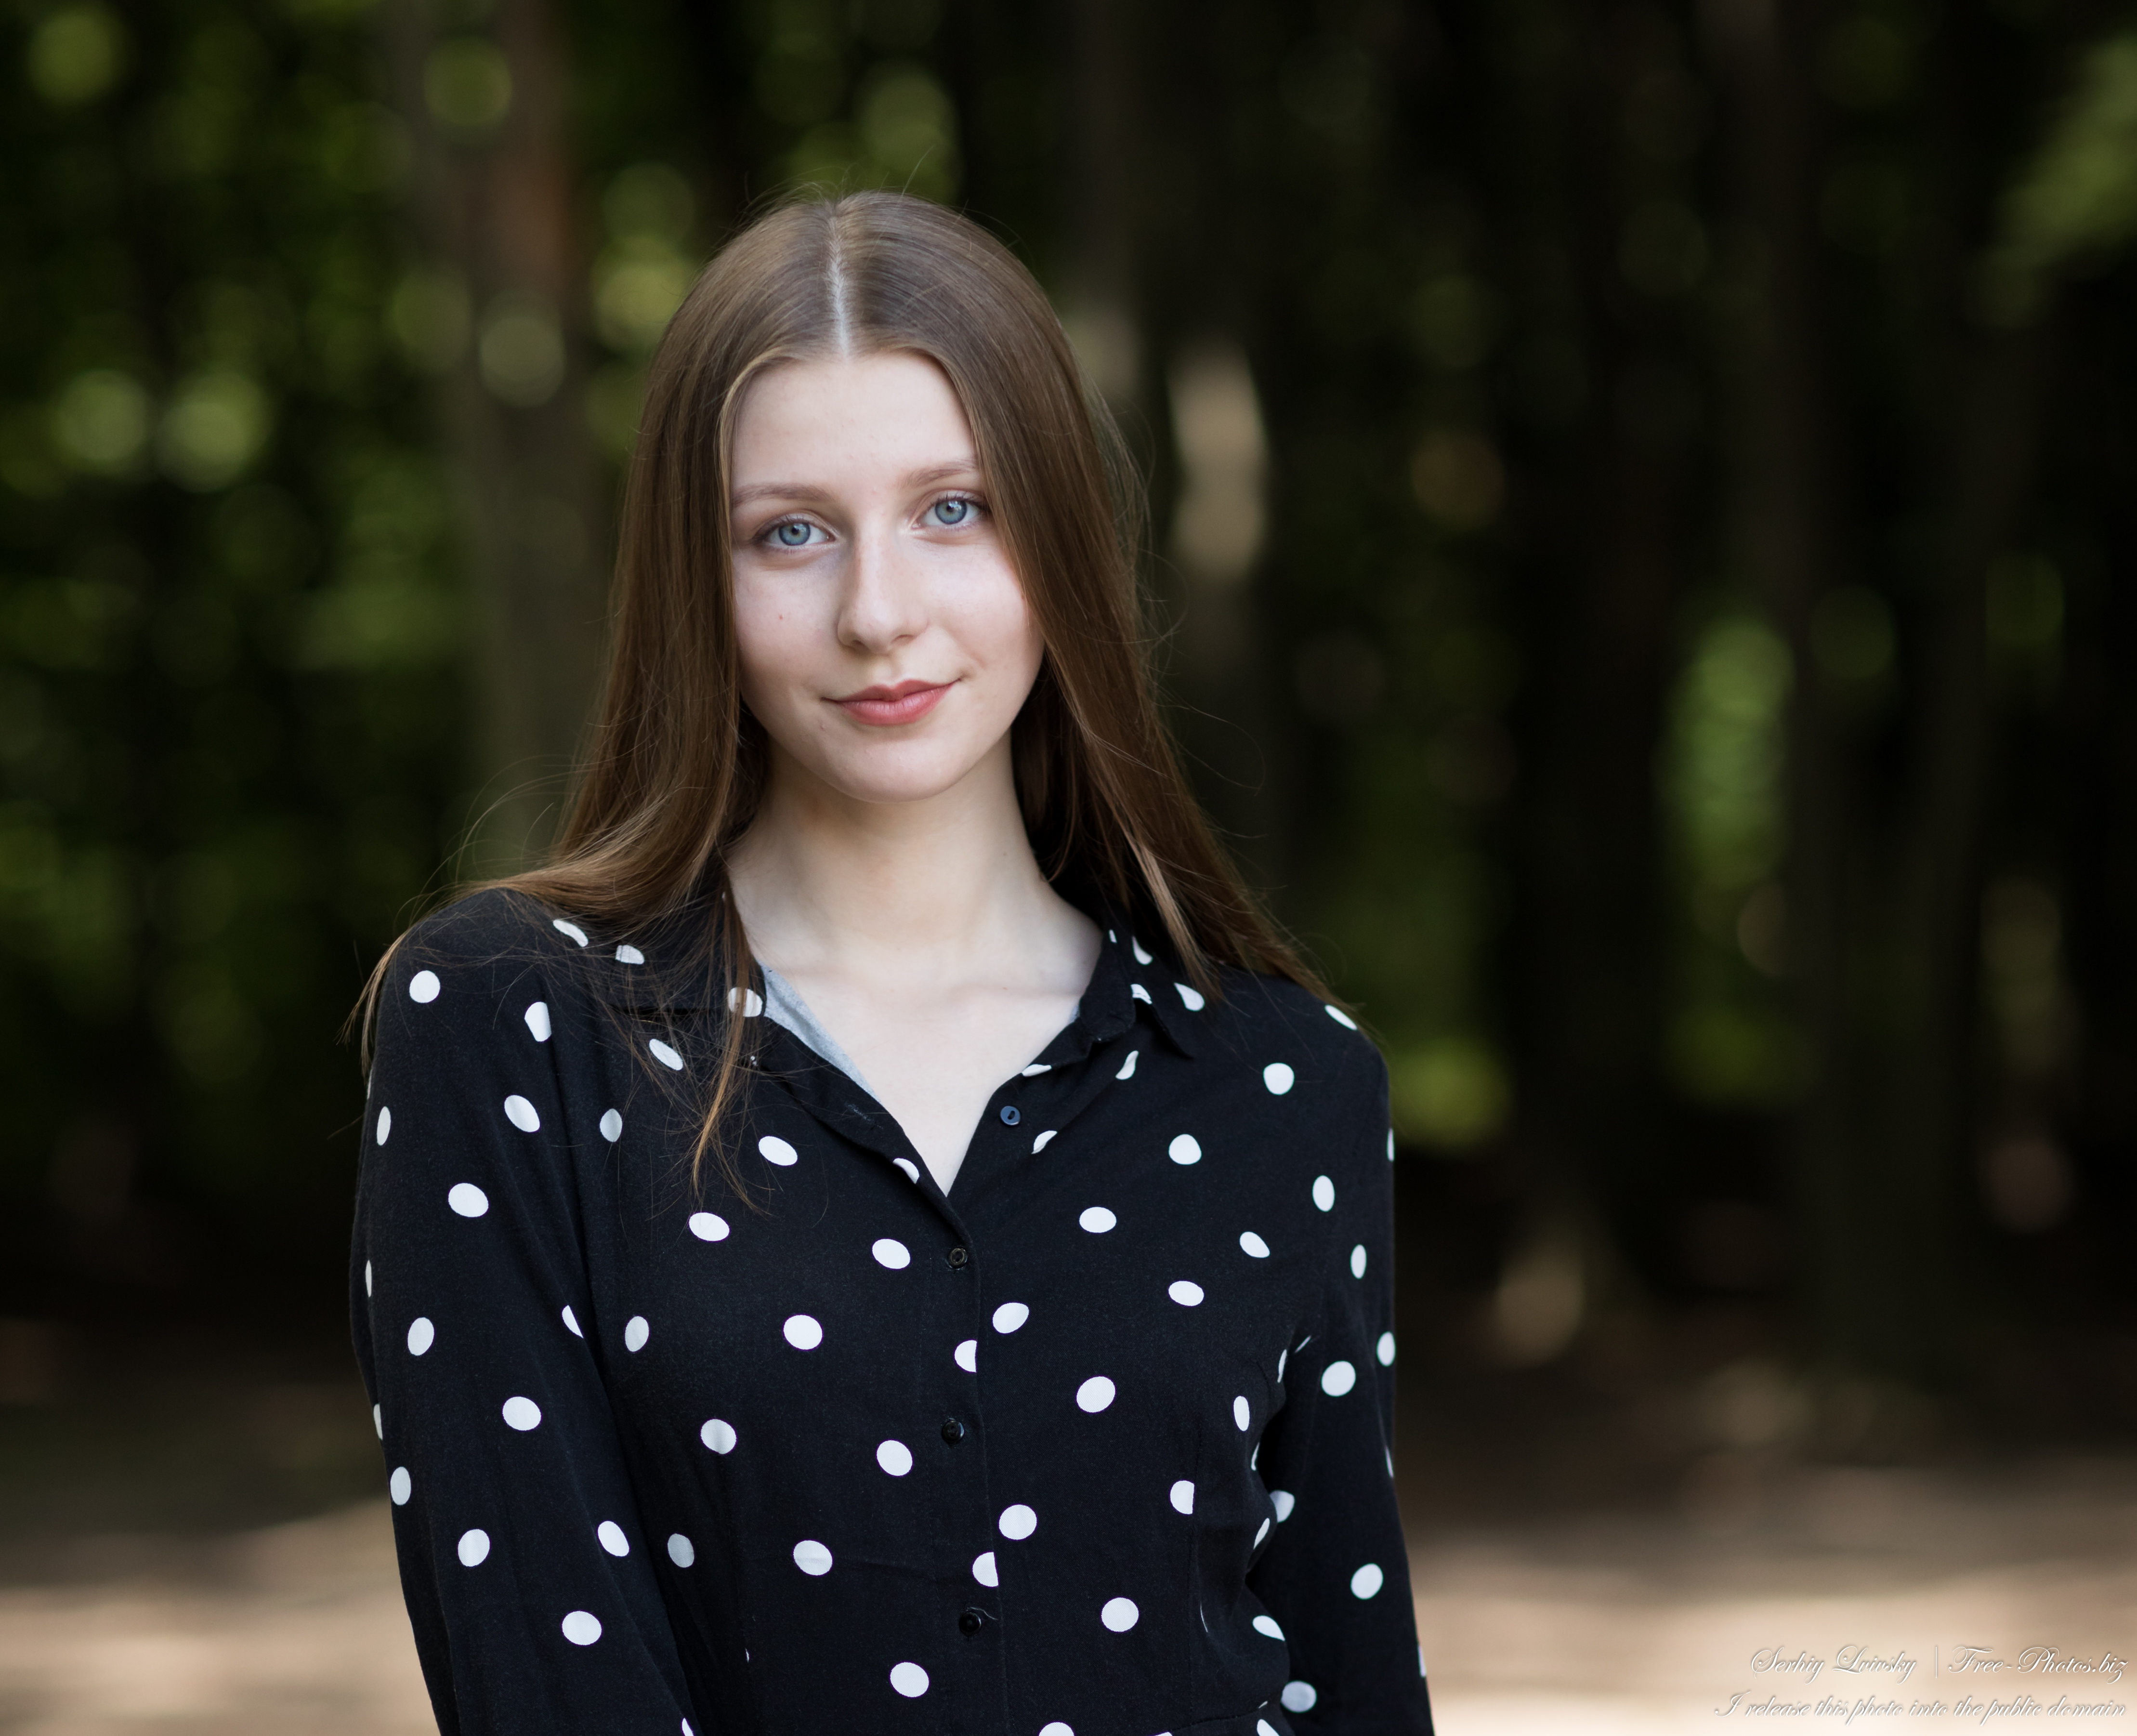 Inna - an 18-year-old natural fair-haired girl photographed in July 2020 by Serhiy Lvivsky, picture 16